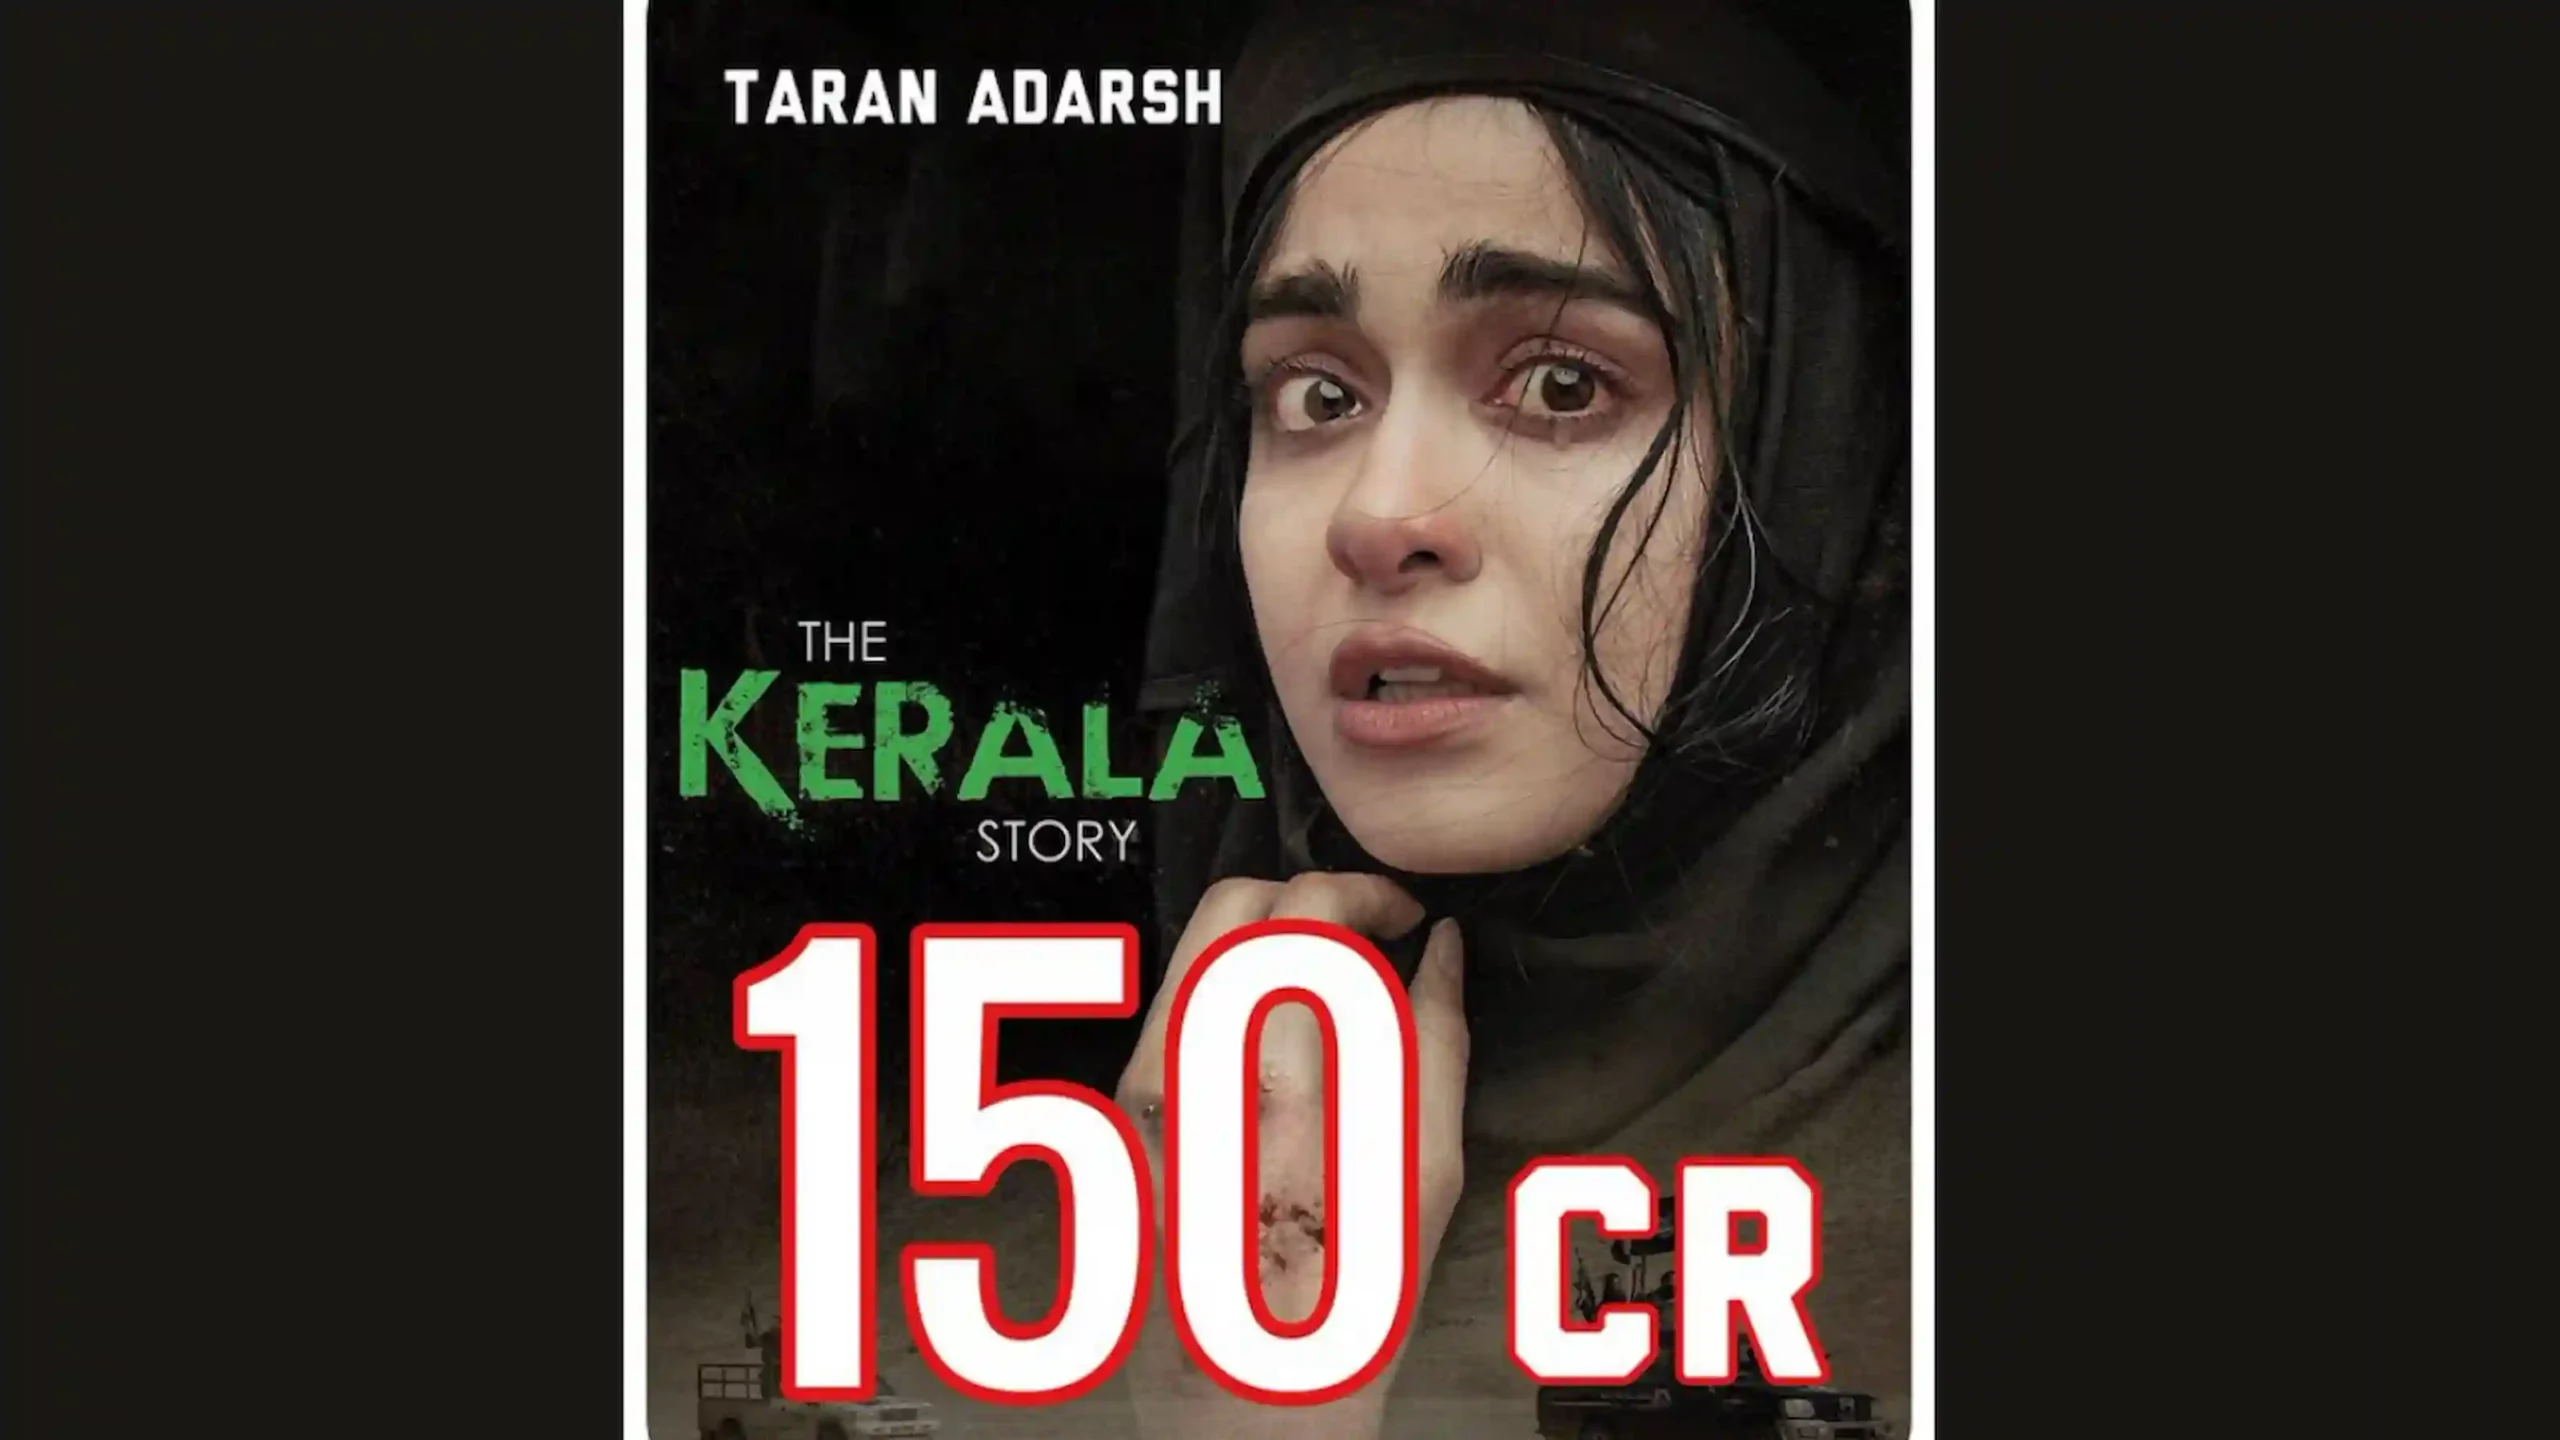 The Kerala Story Box Office Collection by Taran Adarsh on Twitter